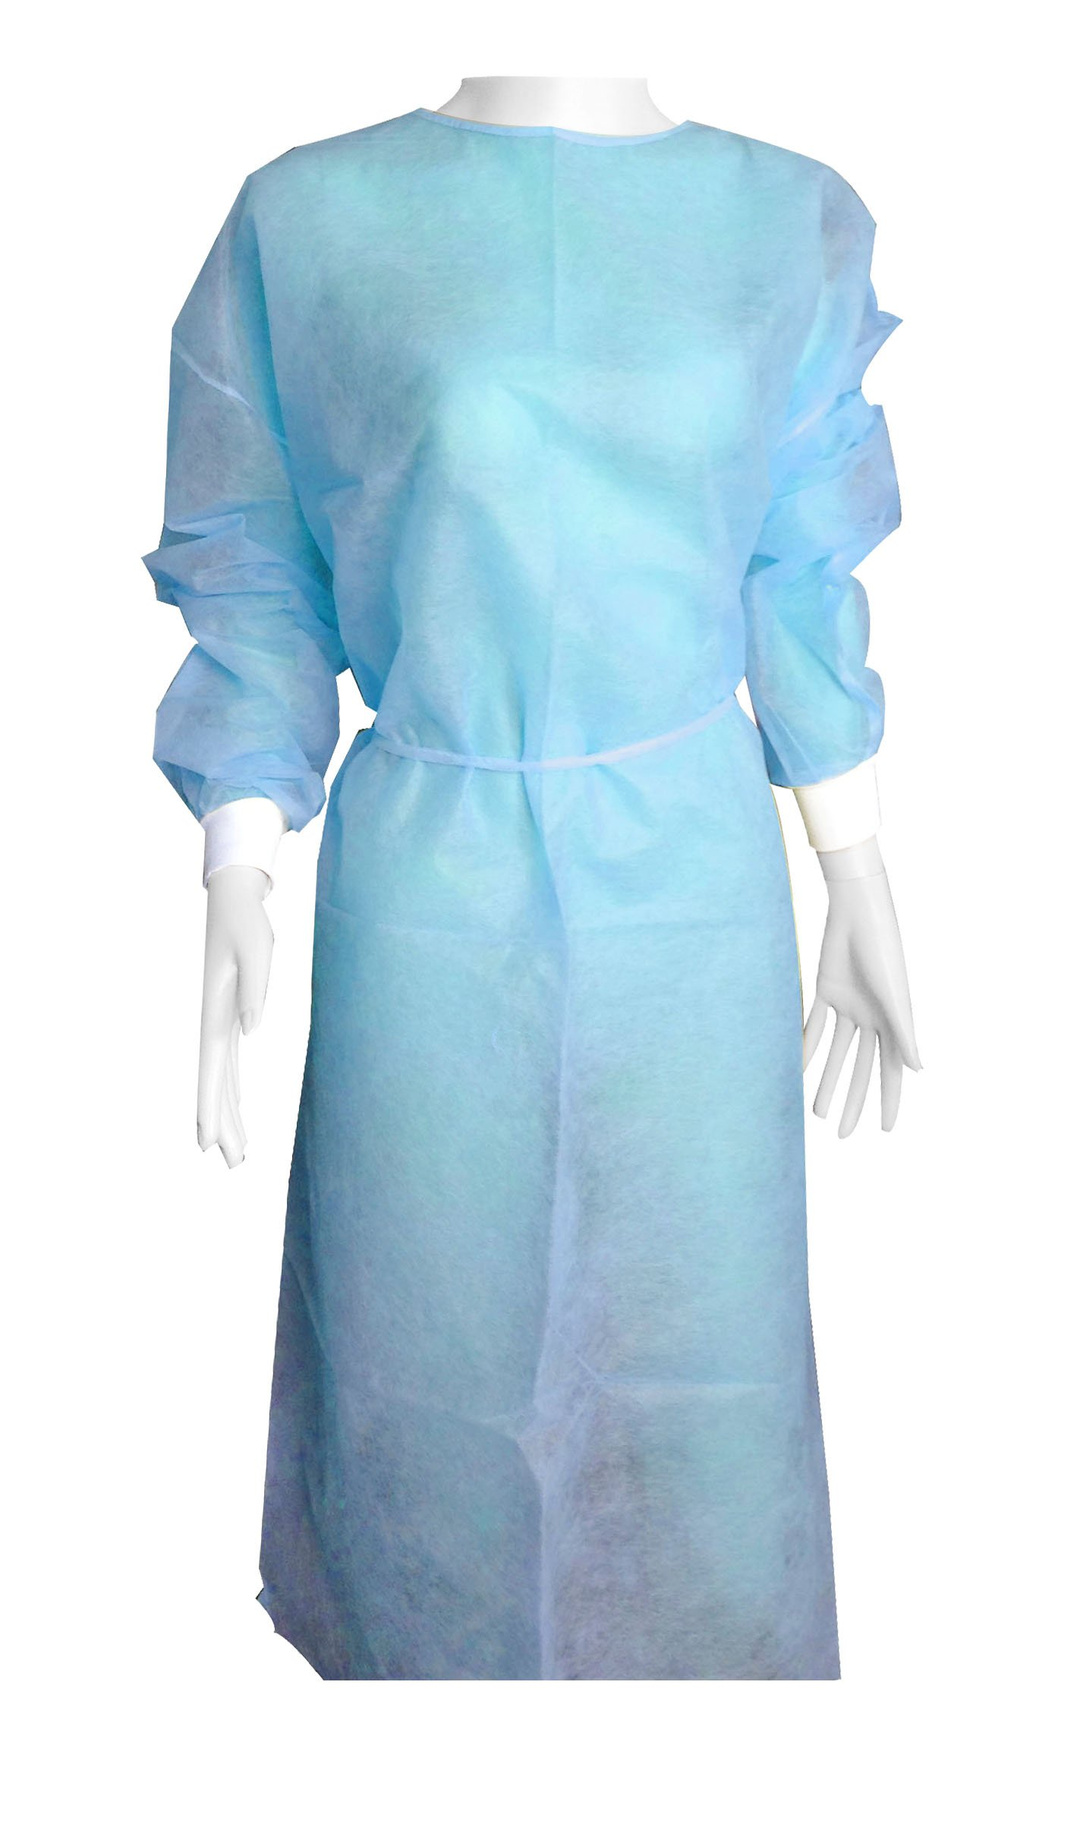 Royal Surgicare Isolation Gown Blue 30GSM Pack of 10